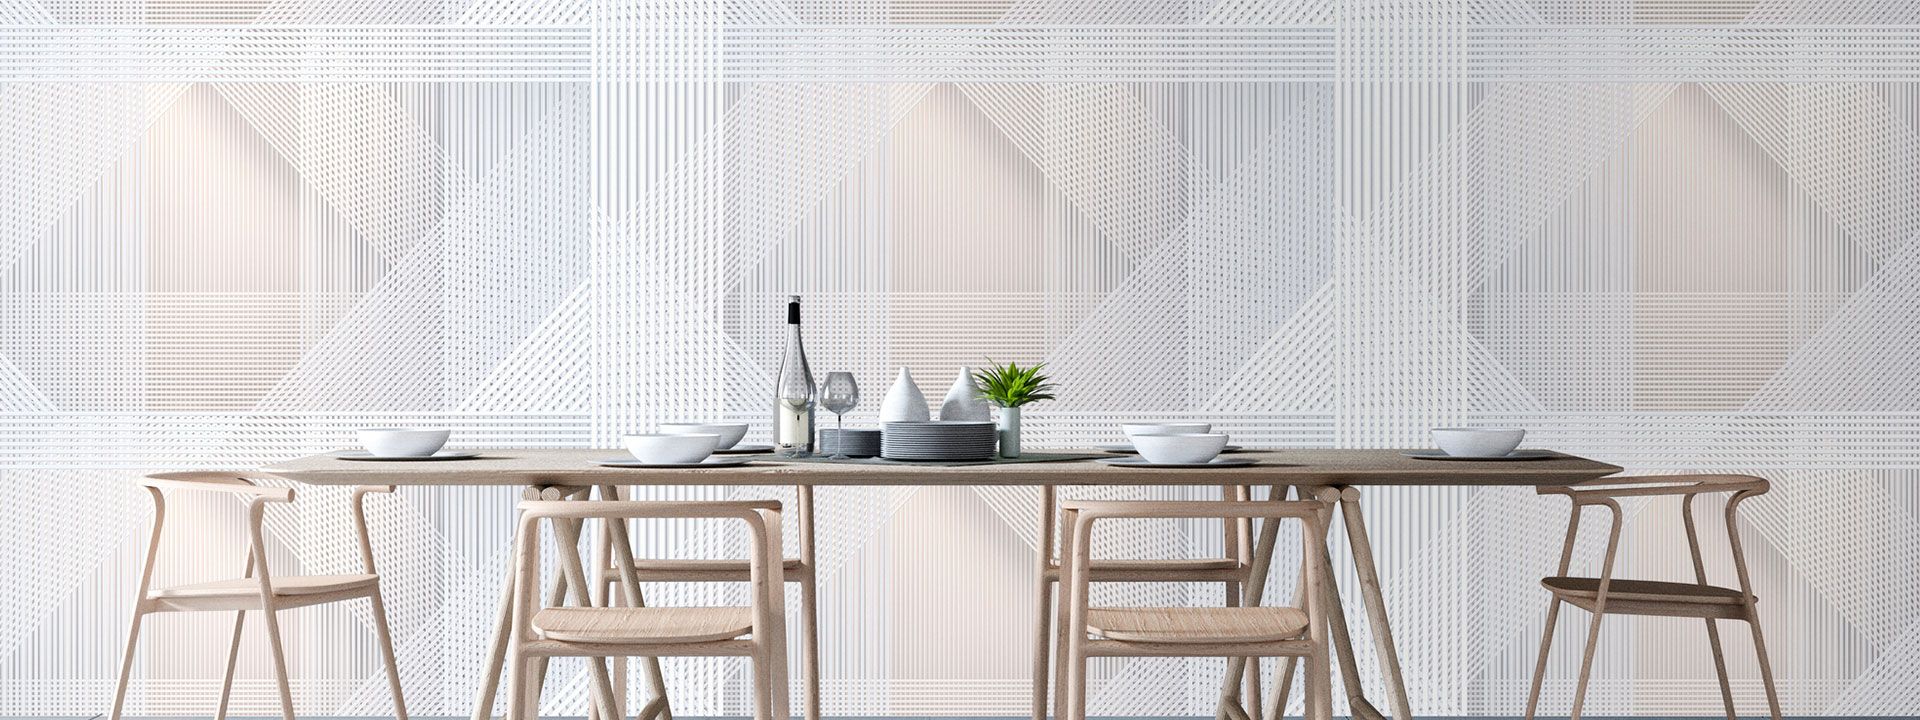 Dining room table set in front of geometric photo wallpaper with line design DD114382